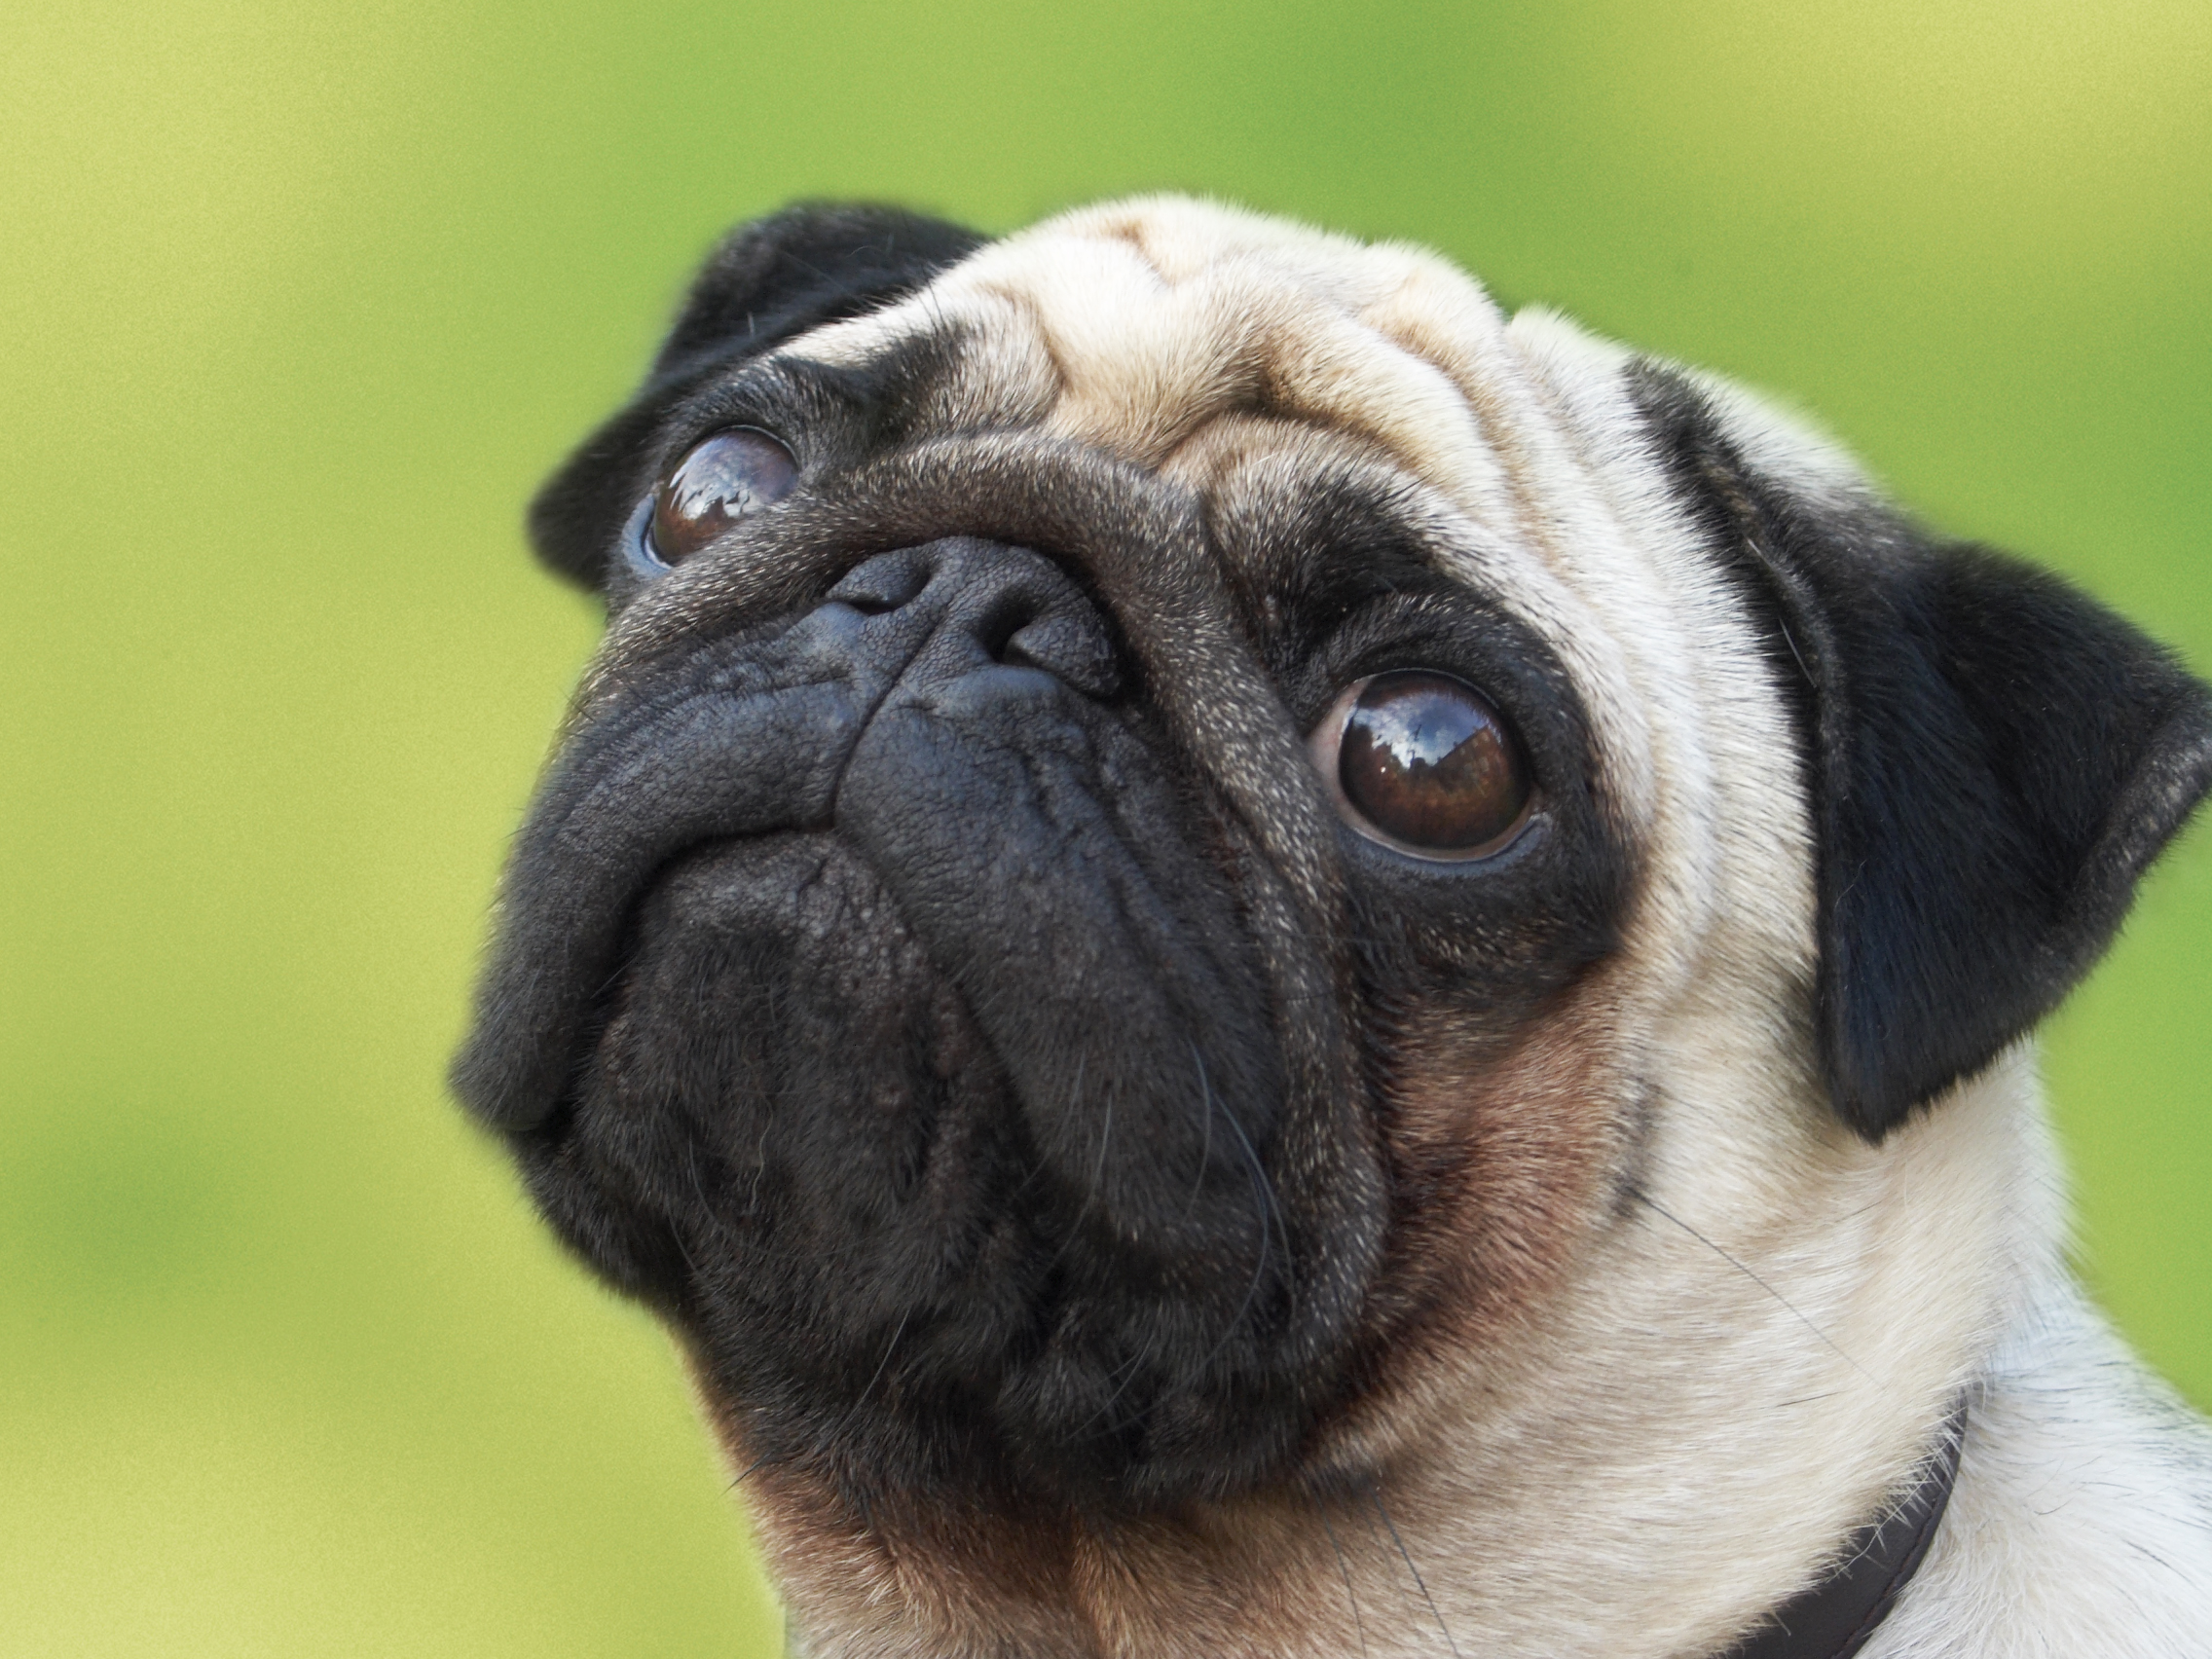 Pug on green background